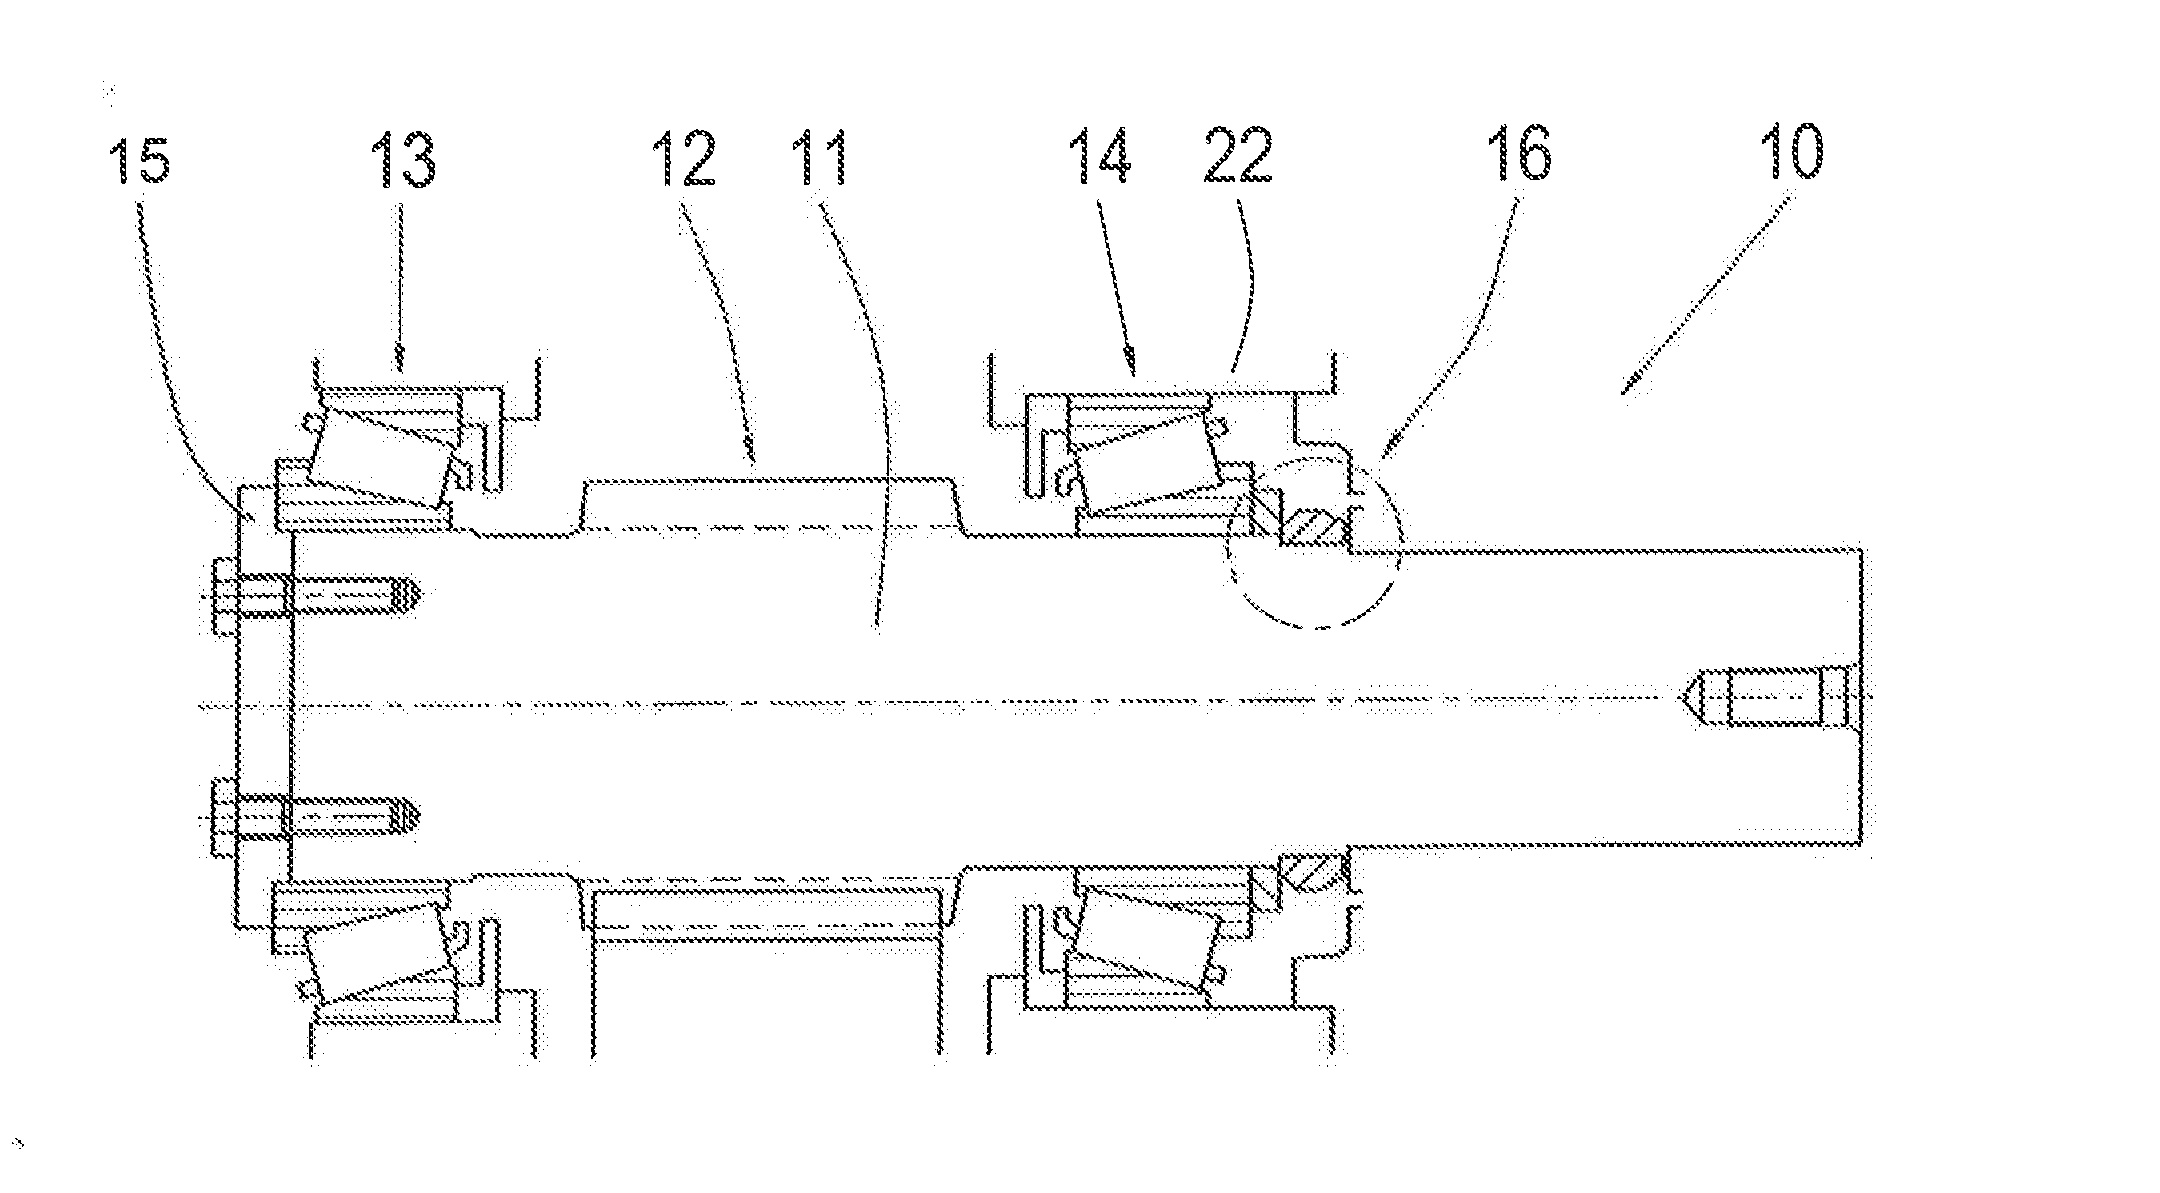 Shaft-bearing subassembly for a wind turbine transmission